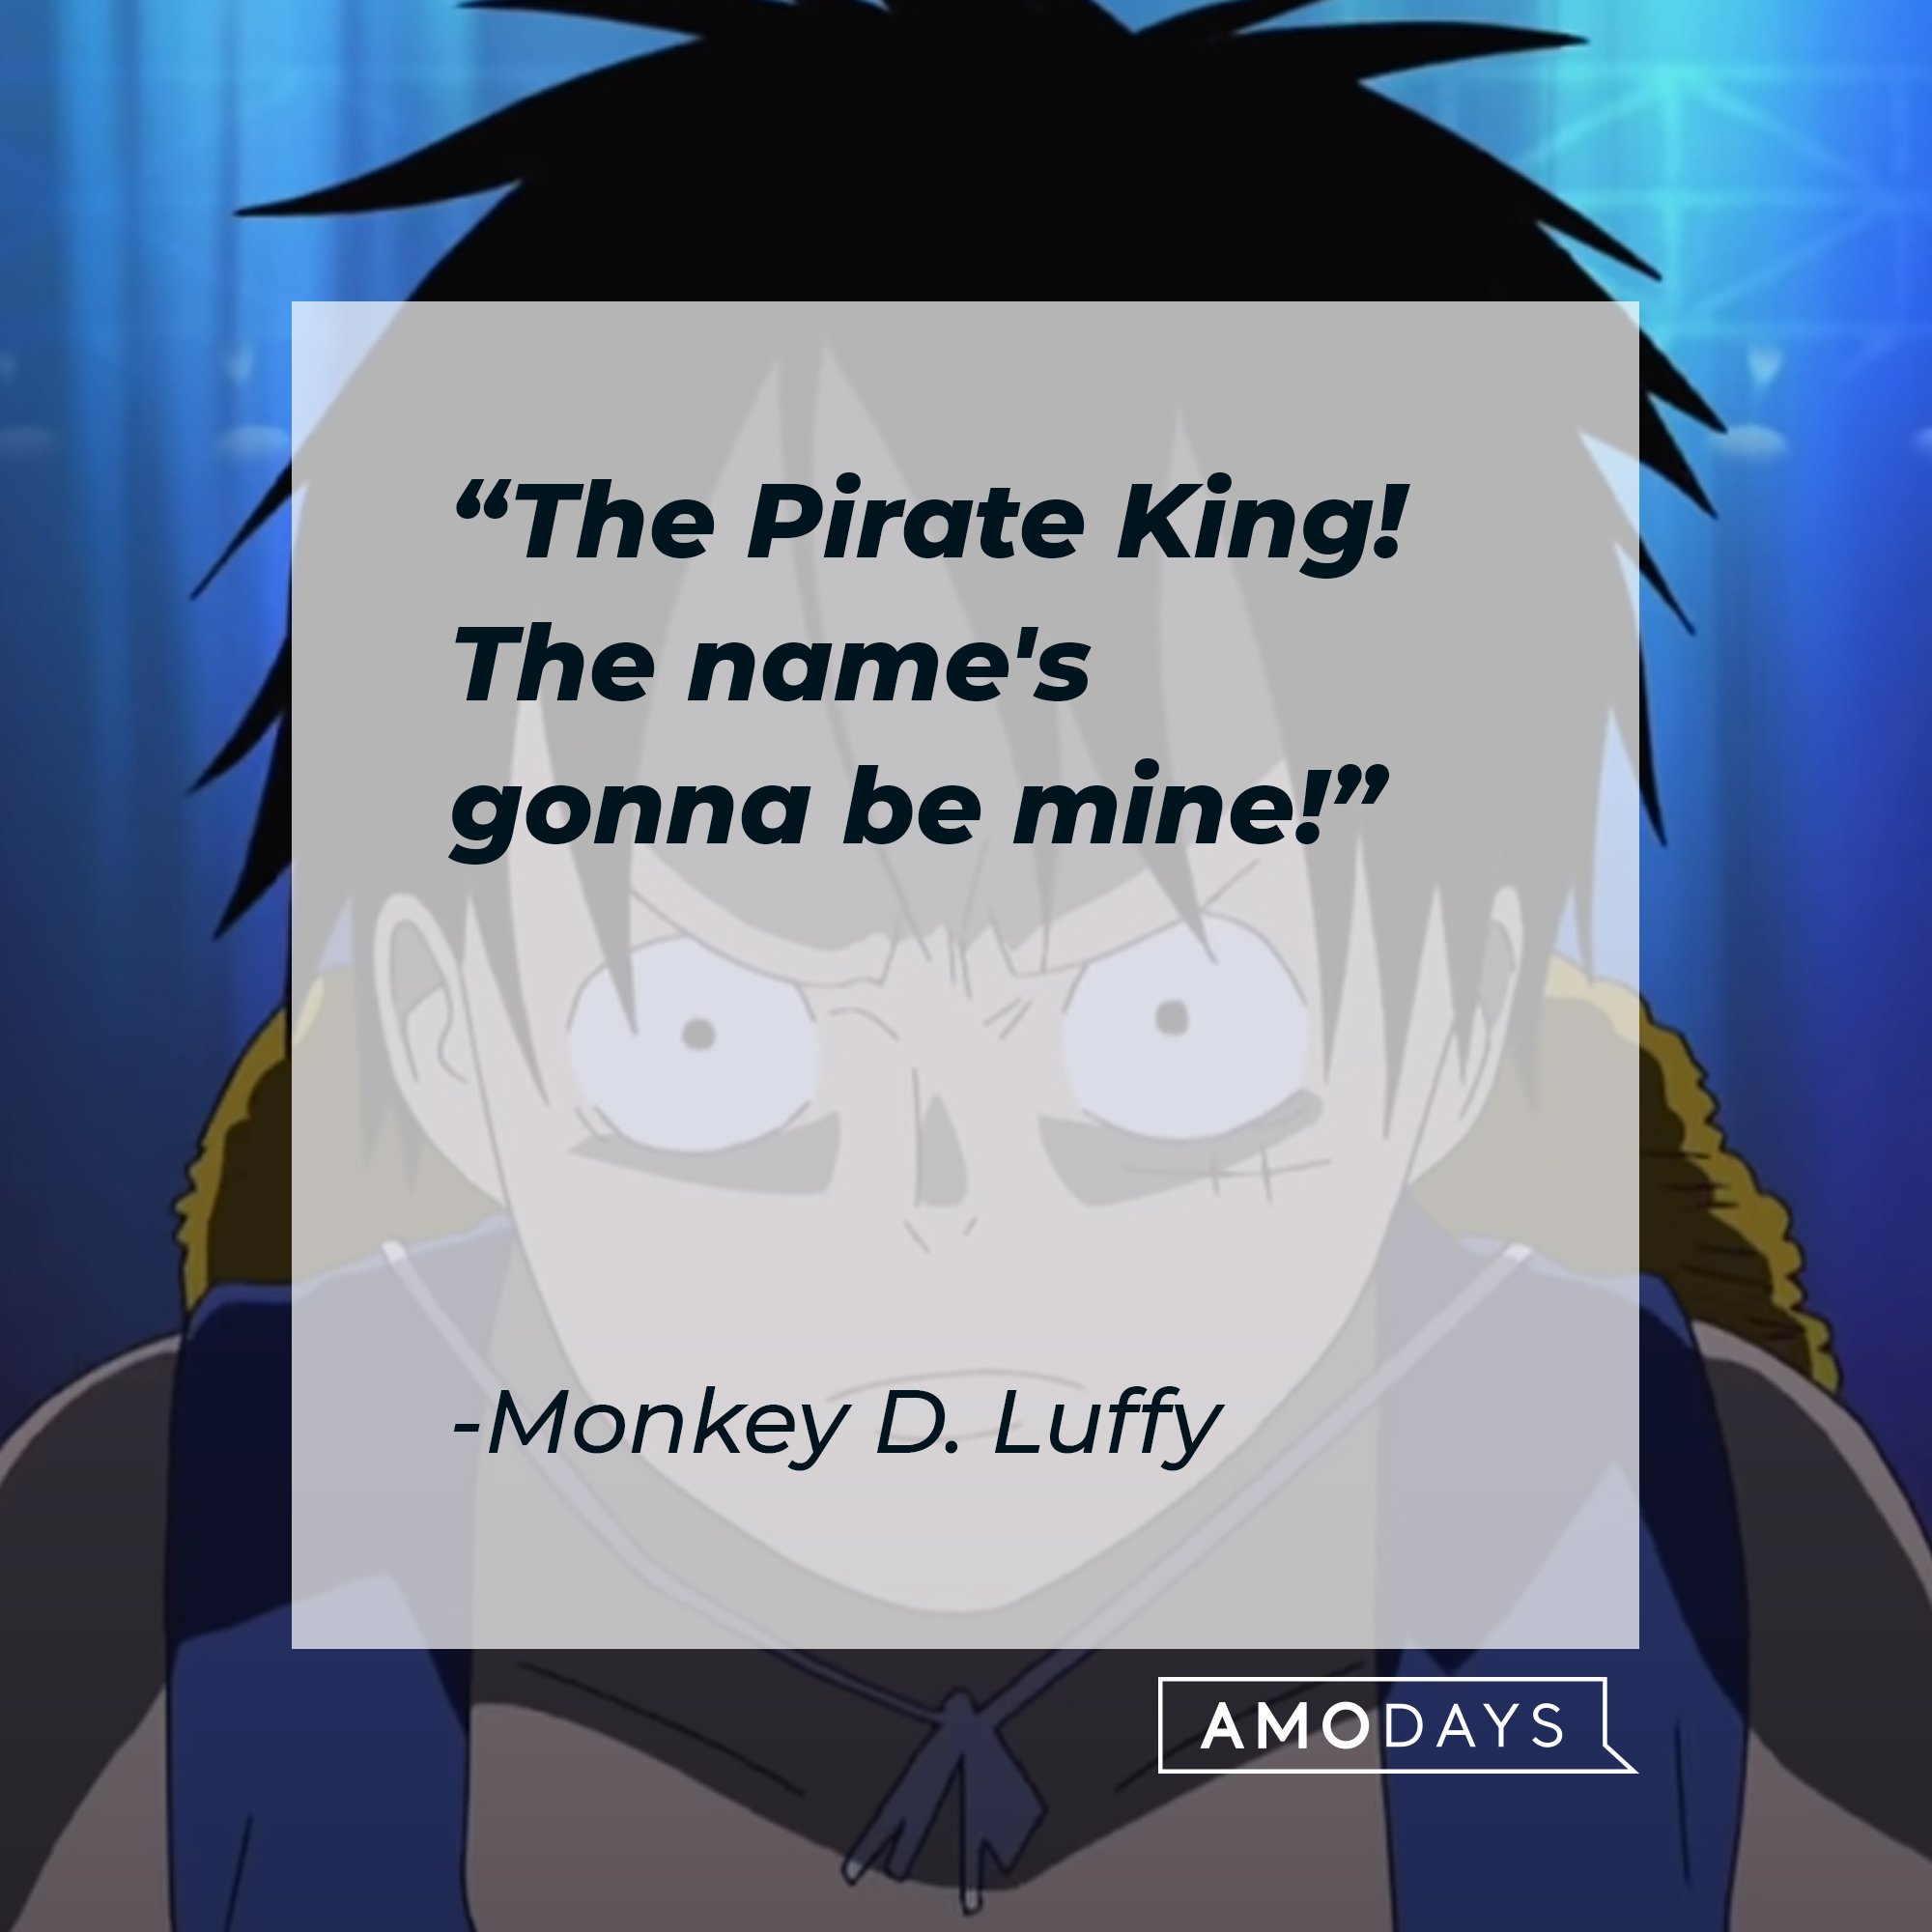 Monkey D. Luffy's quote: "The Pirate King! The name's gonna be mine!" | Image: AmoDays